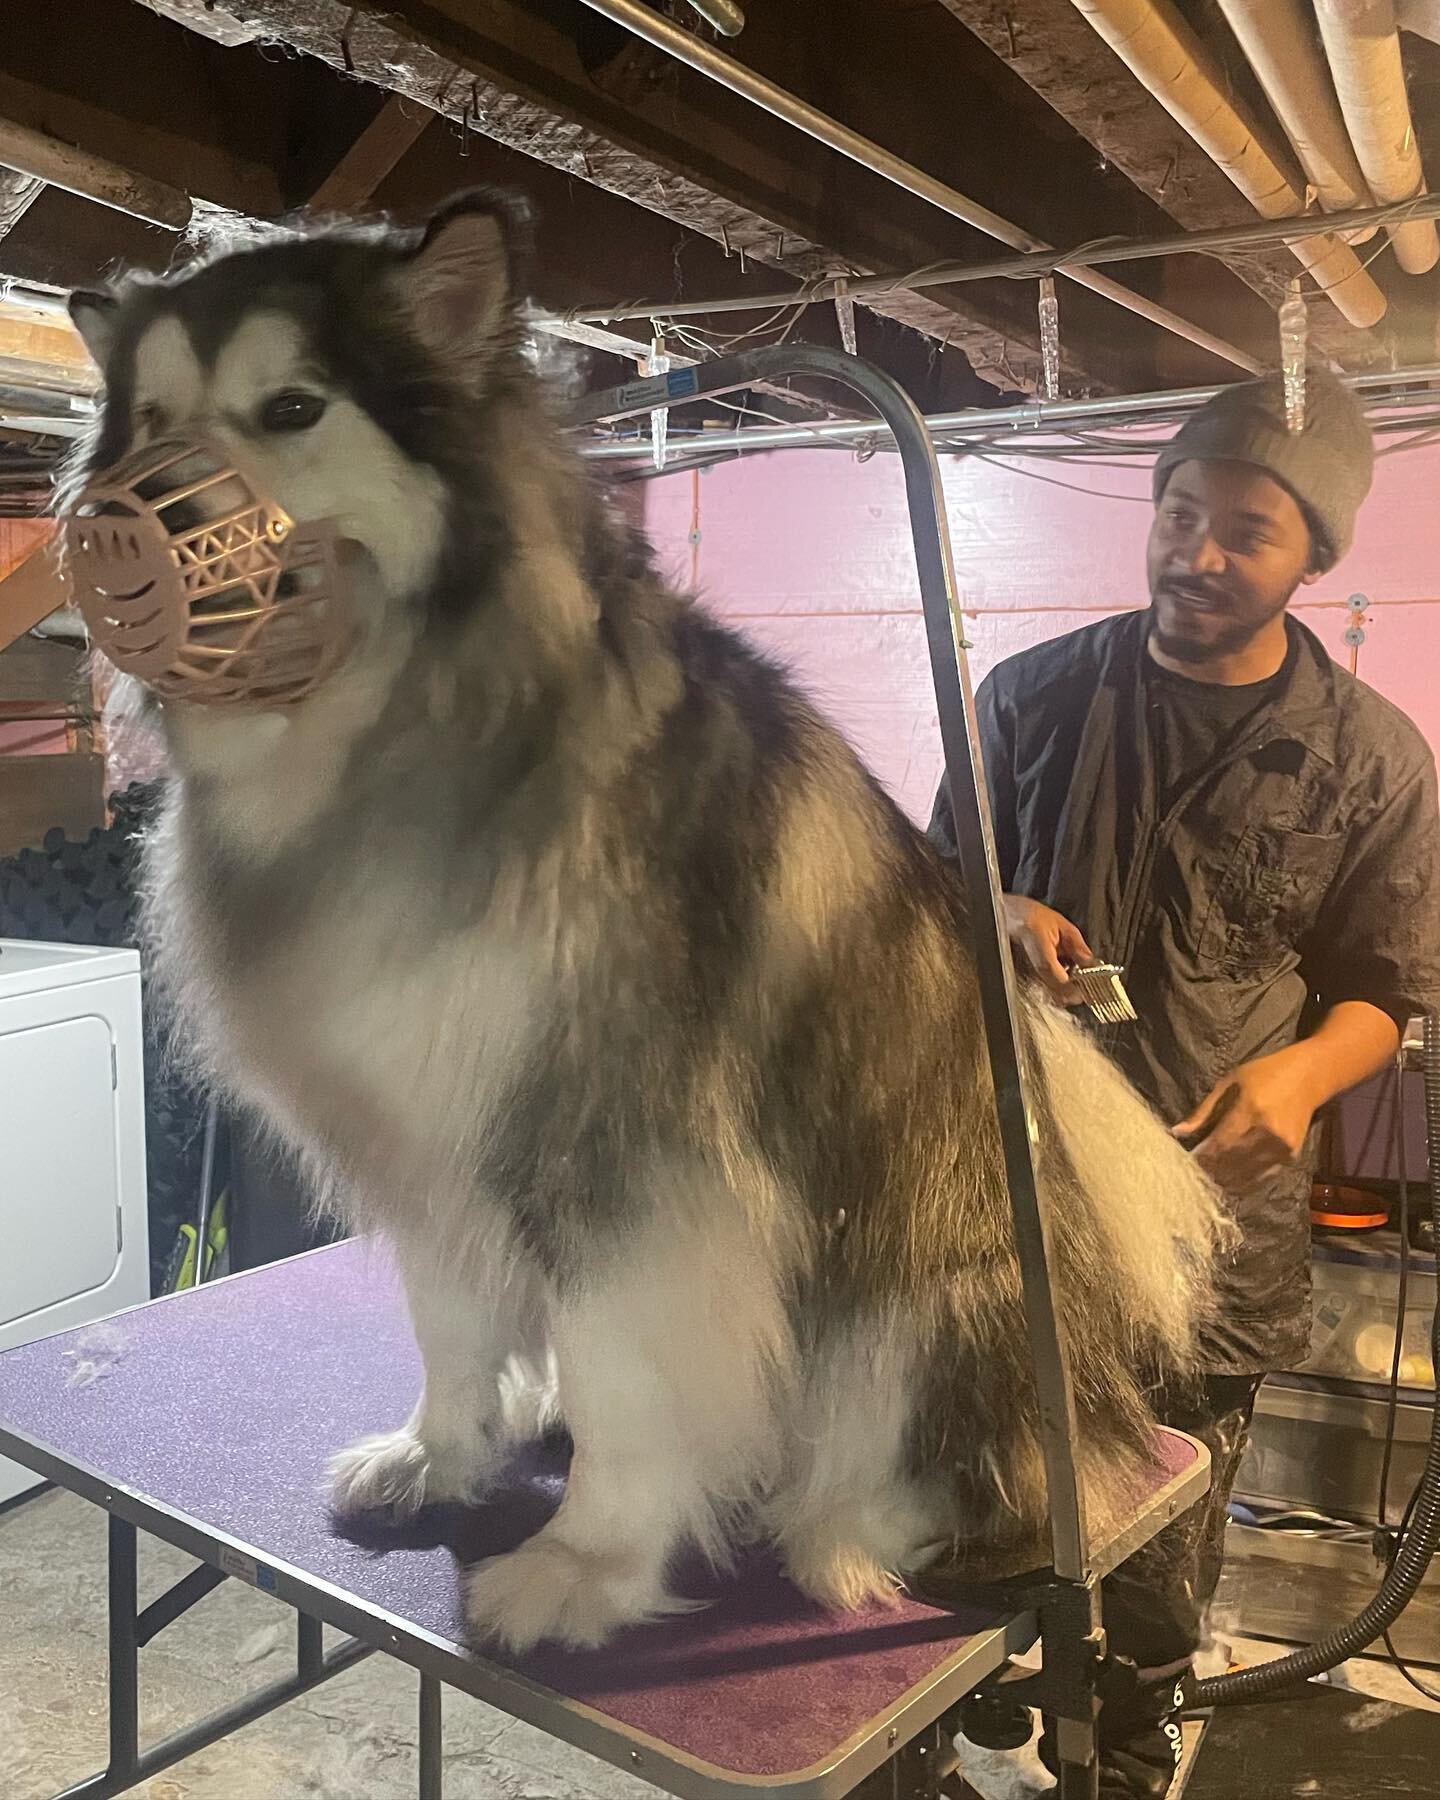 Book your next groom today for Monday 2/20/23 with rockstar groomer Deon!
.
.
.
.
#bowwowmeowpurrfessionalpetcare #bowwowbarkery #dogs #chicago #chicagodogs #Dogsofinstagram #cats #glutenfree #organic #petcare #pets #catsofinstagram #ubereats #doorda